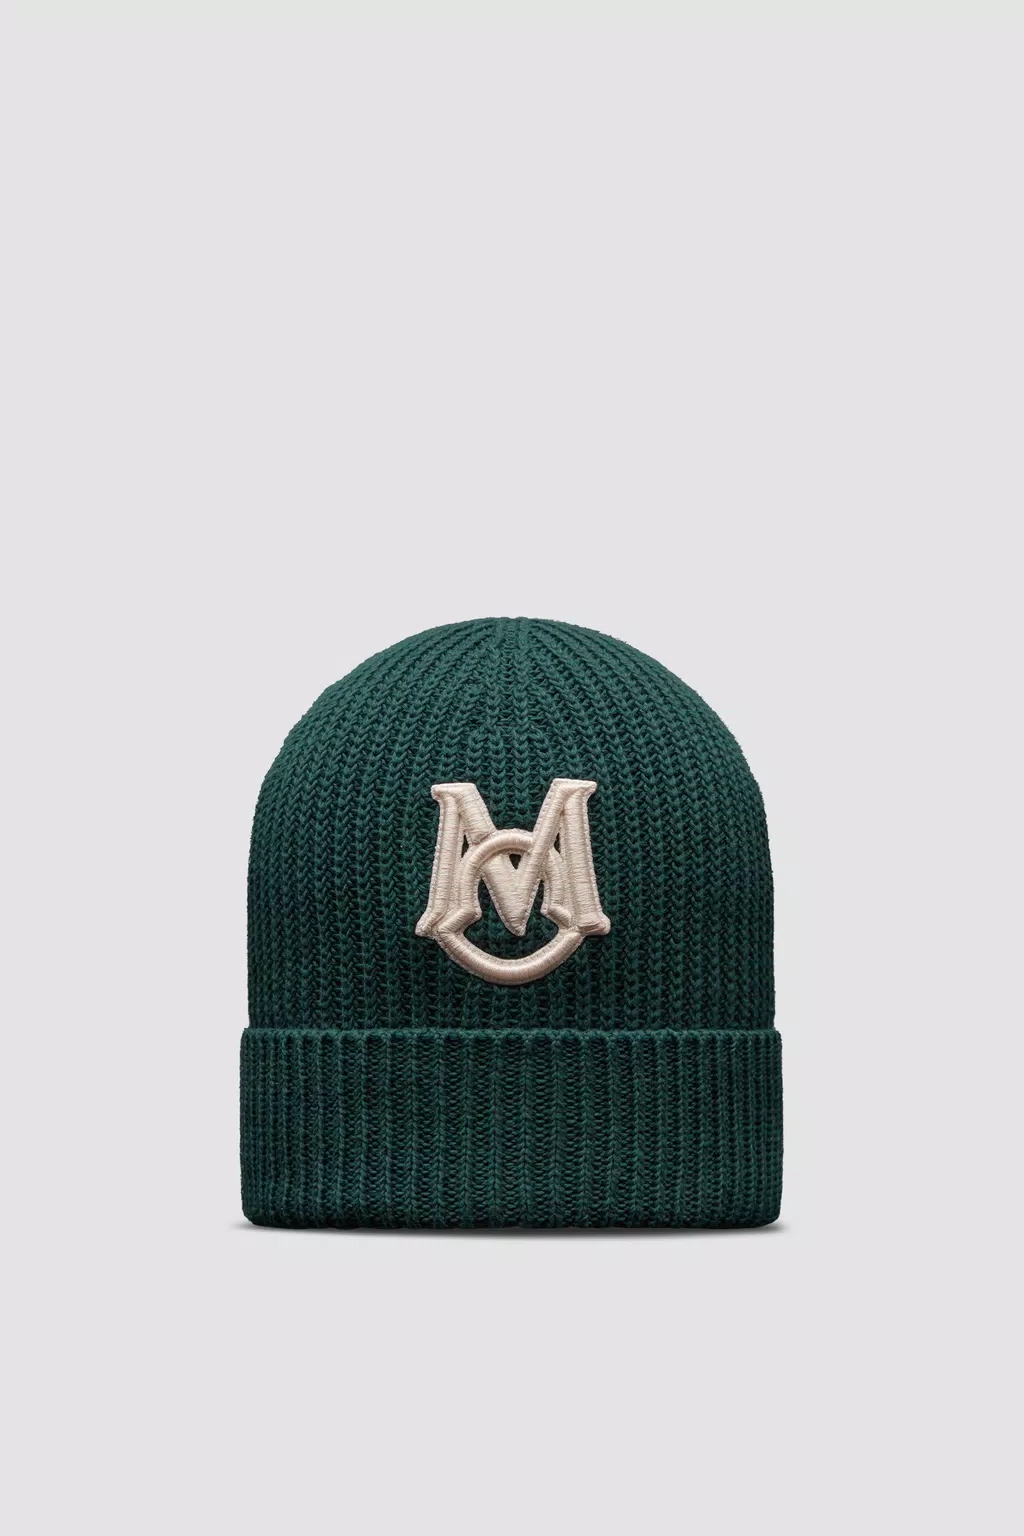 Emerald Green Embroidered Monogram Beanie - Hats & Beanies for Men